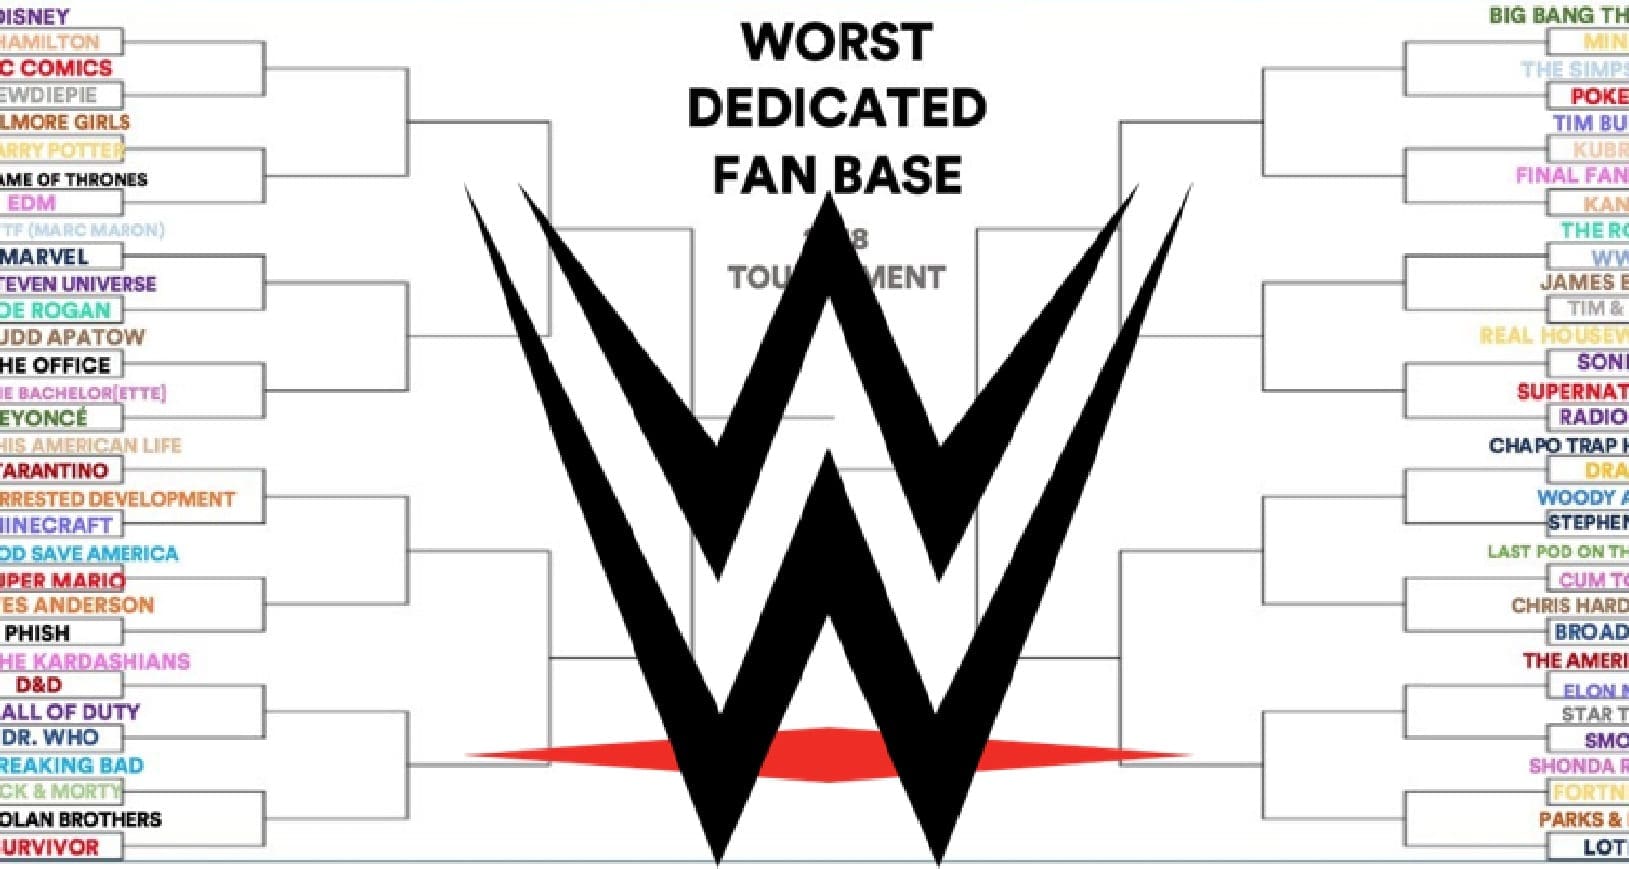 WWE Fans Listed In Brackets For “Worst Dedicated Fan Base” Tournament